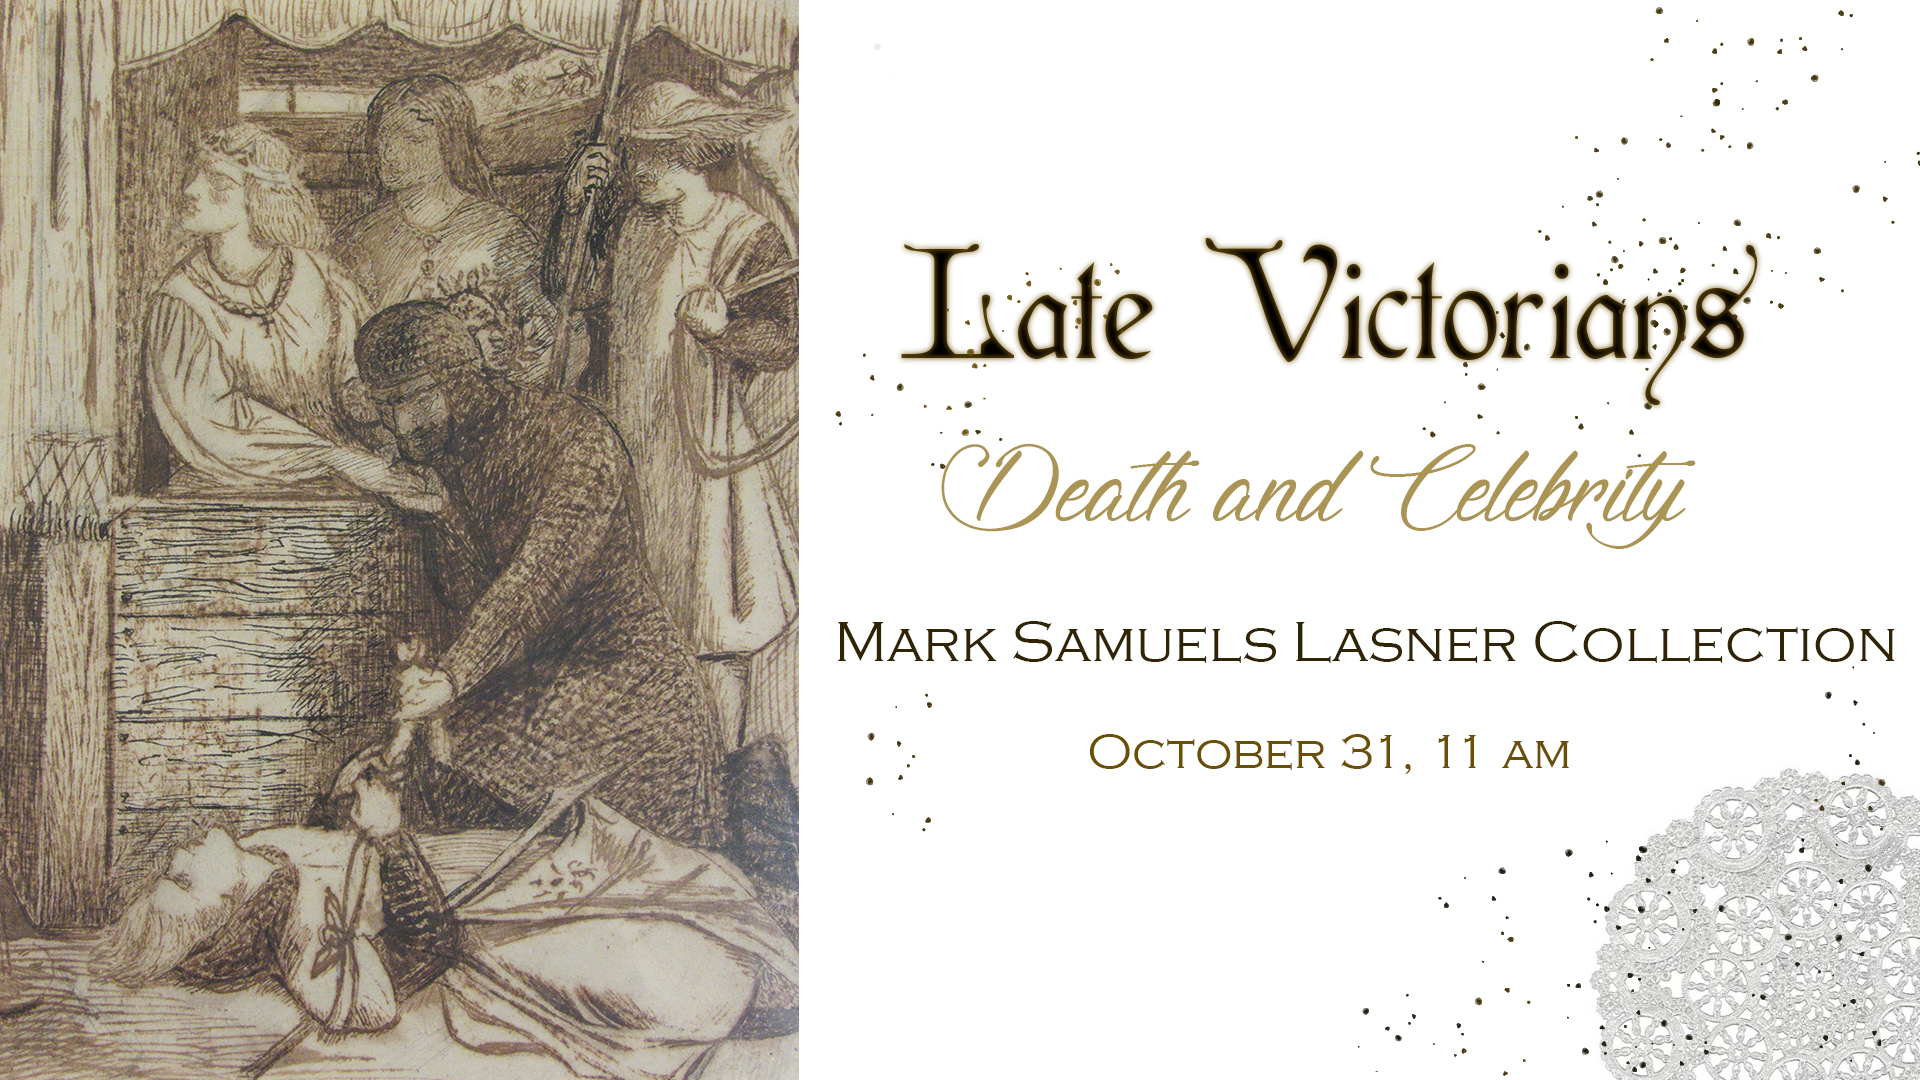 Late Victorians: Death and Celebrity